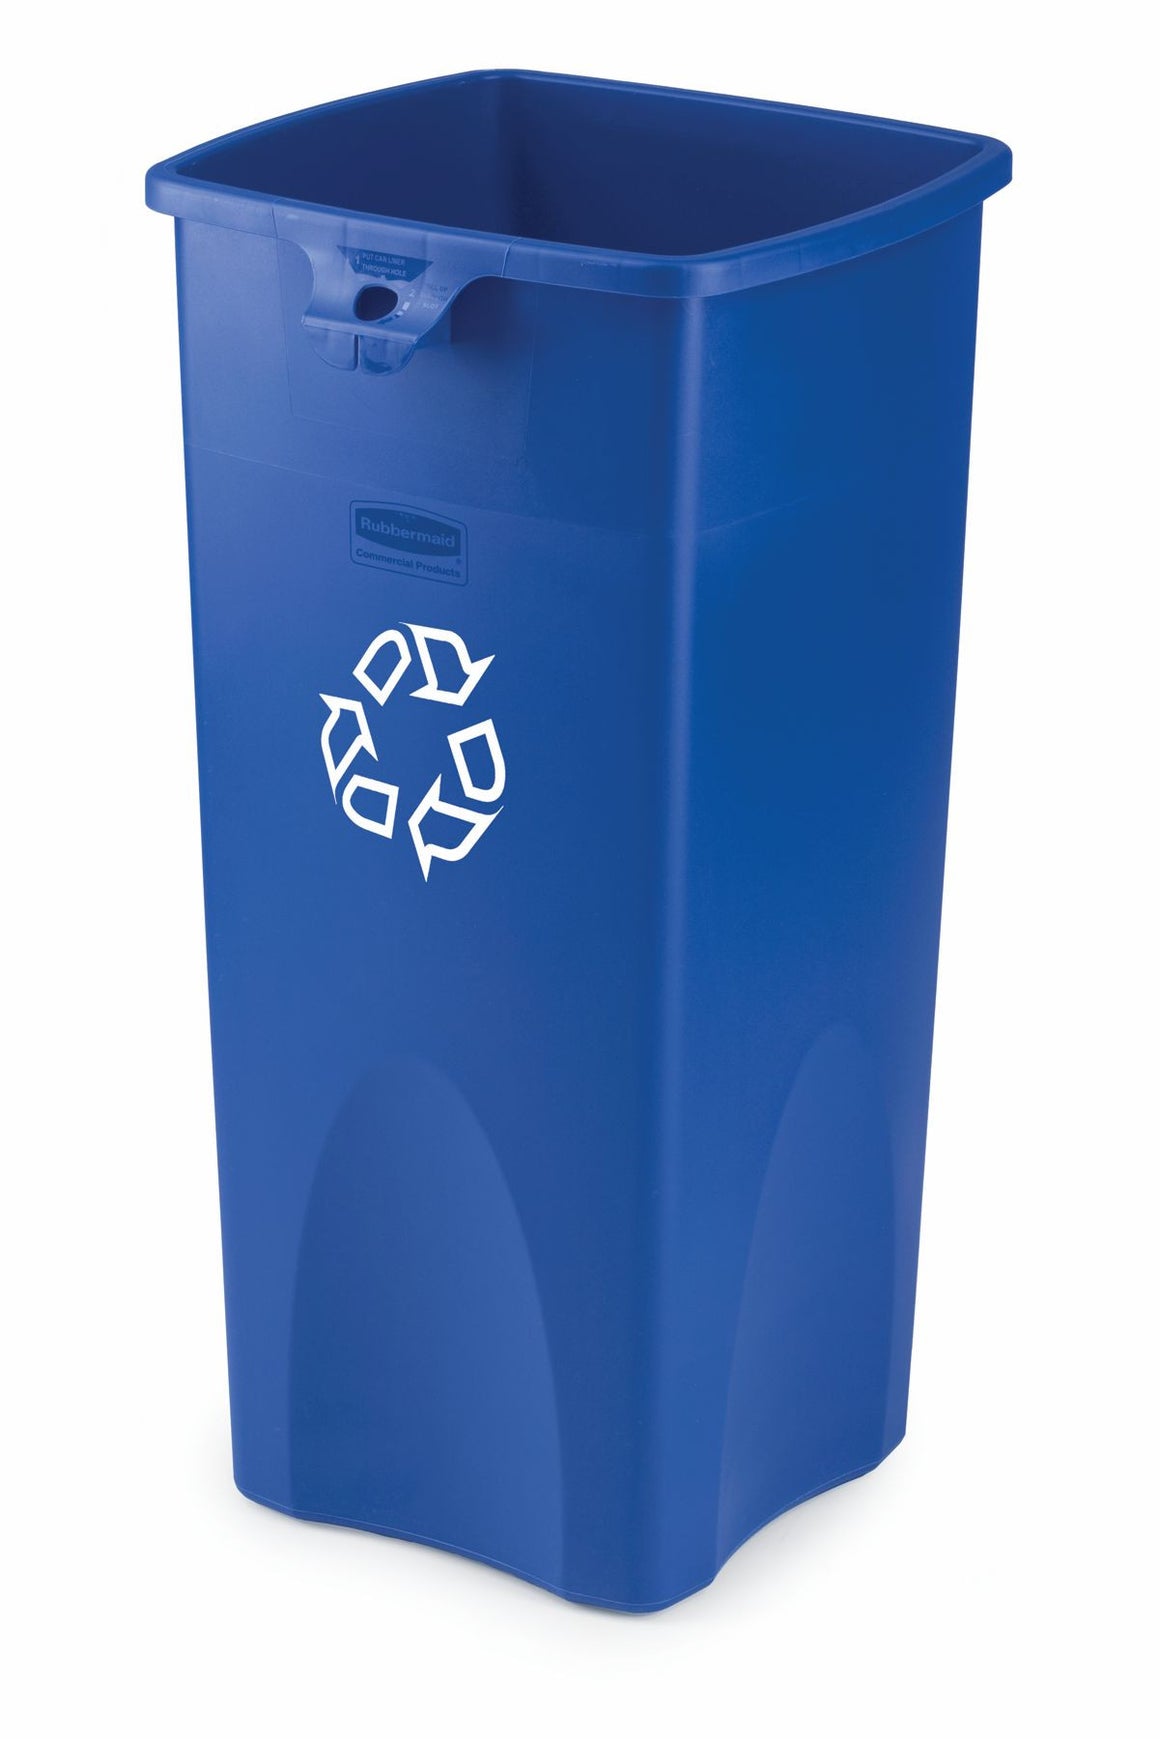 UT SQ RECYCLING CONTAINER BLUE